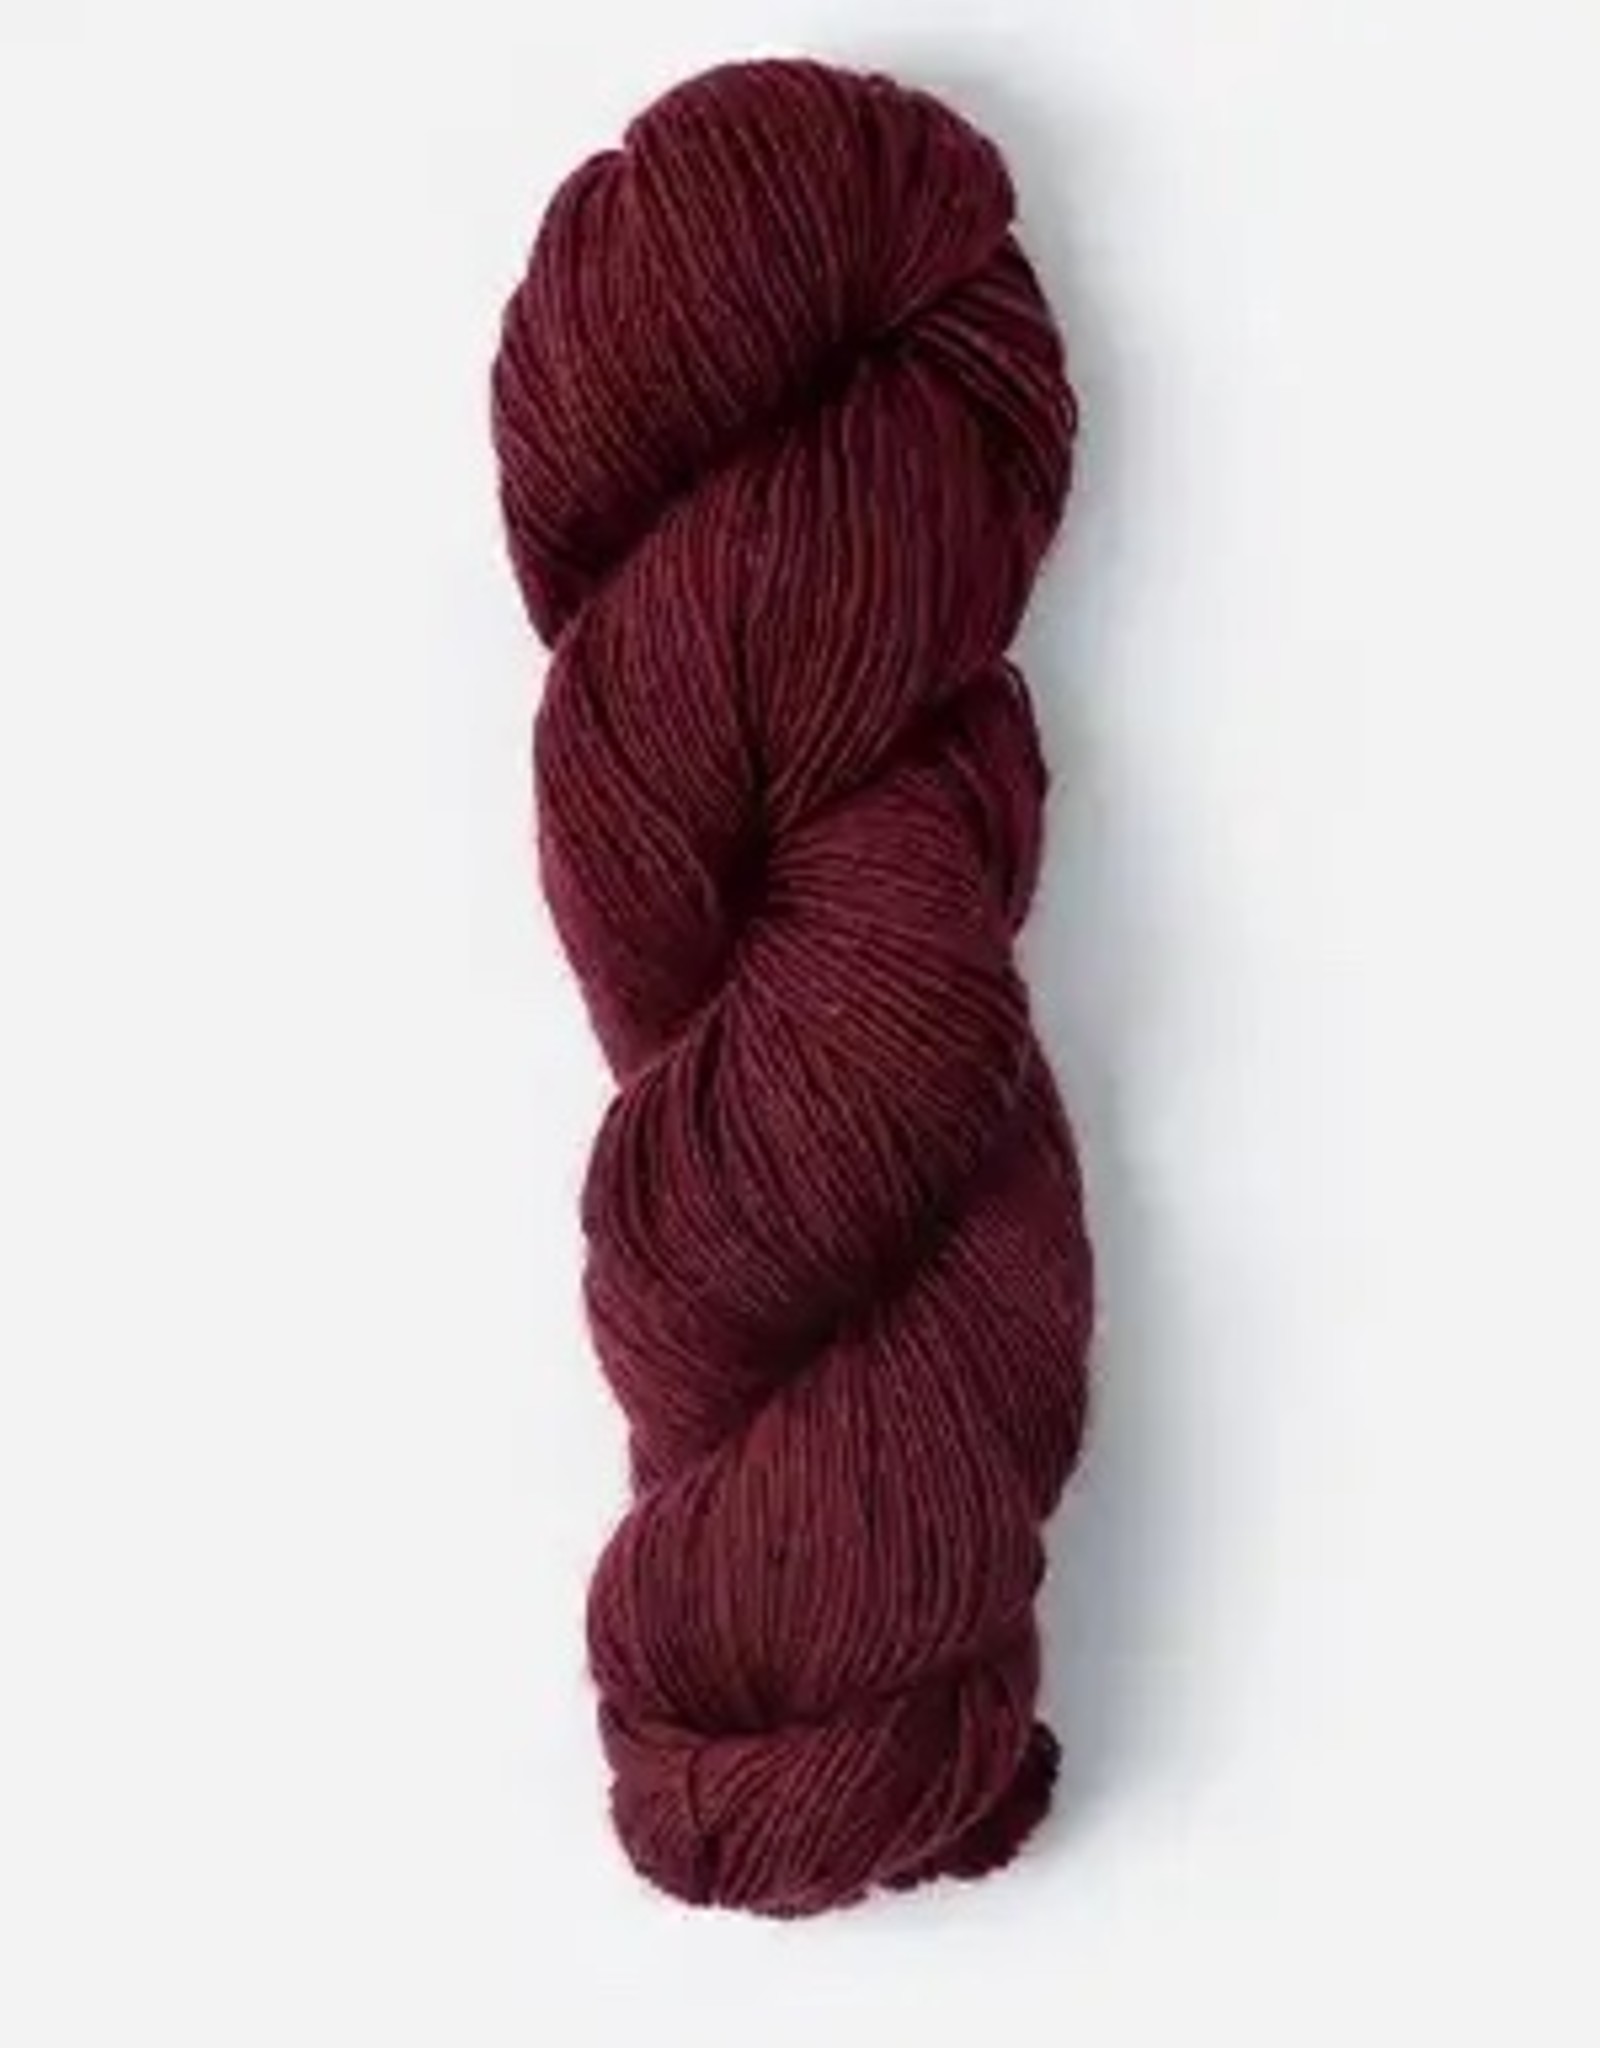 Blue Sky Woolstok Light 2310 cranberry compote